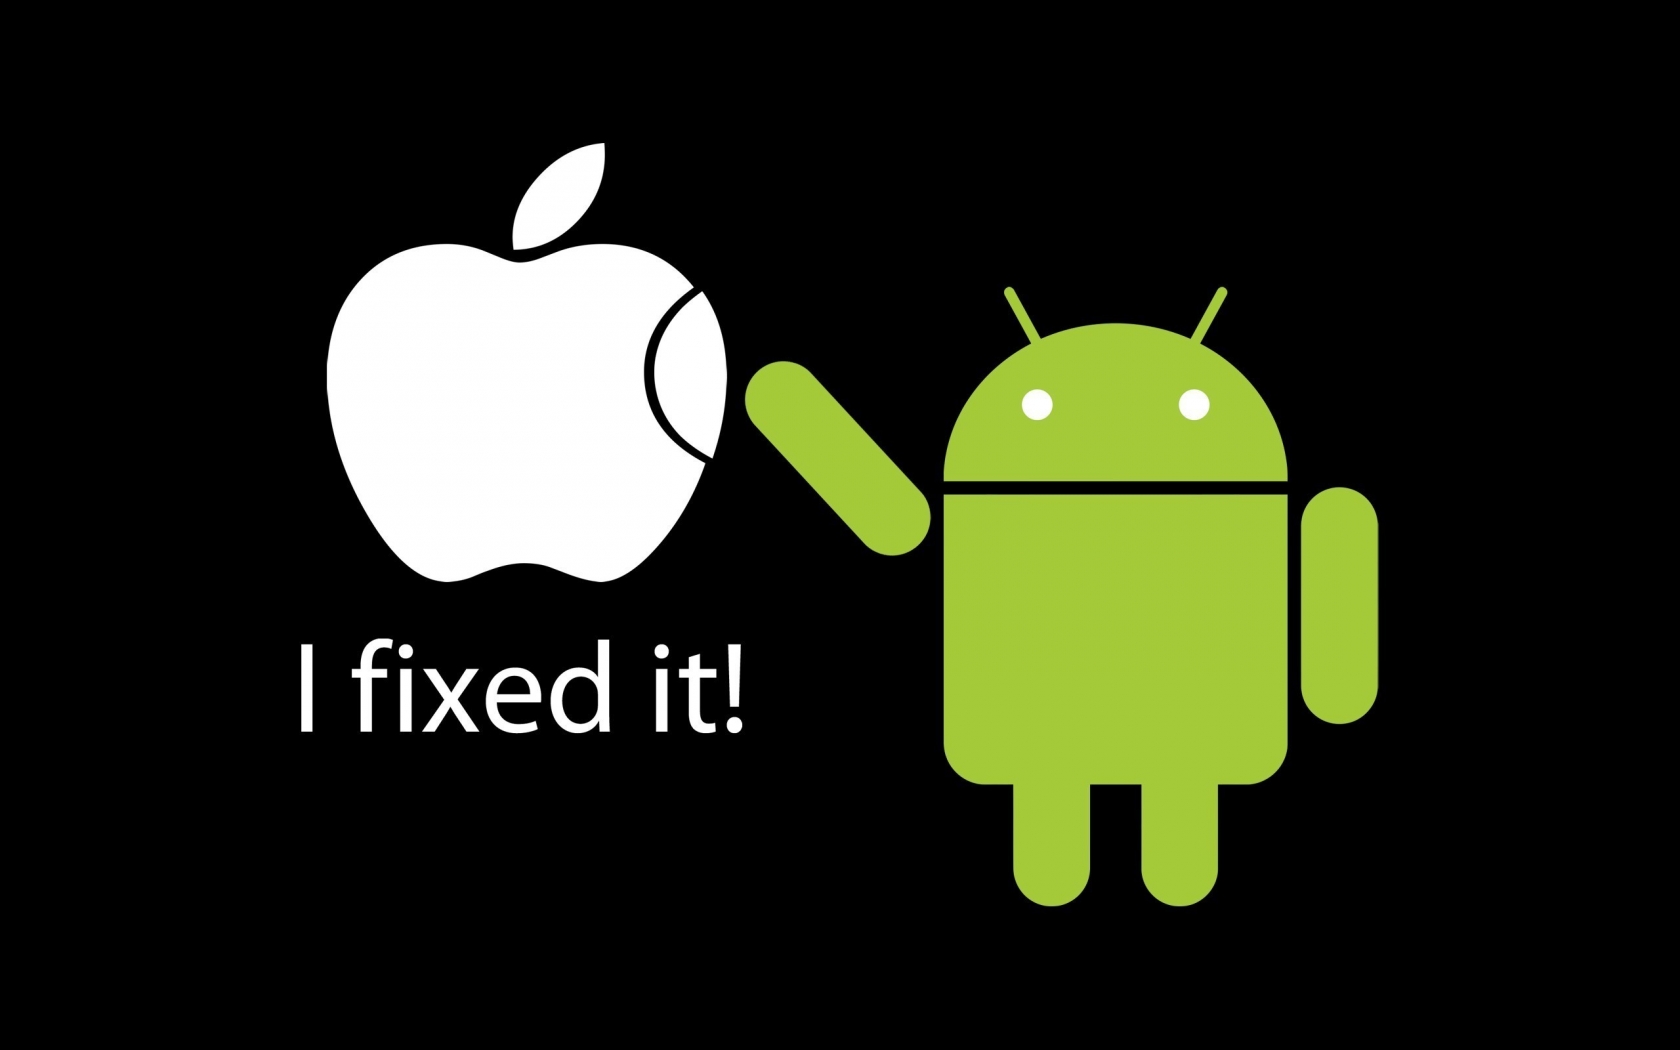 Fixed Apple by Android for 1680 x 1050 widescreen resolution